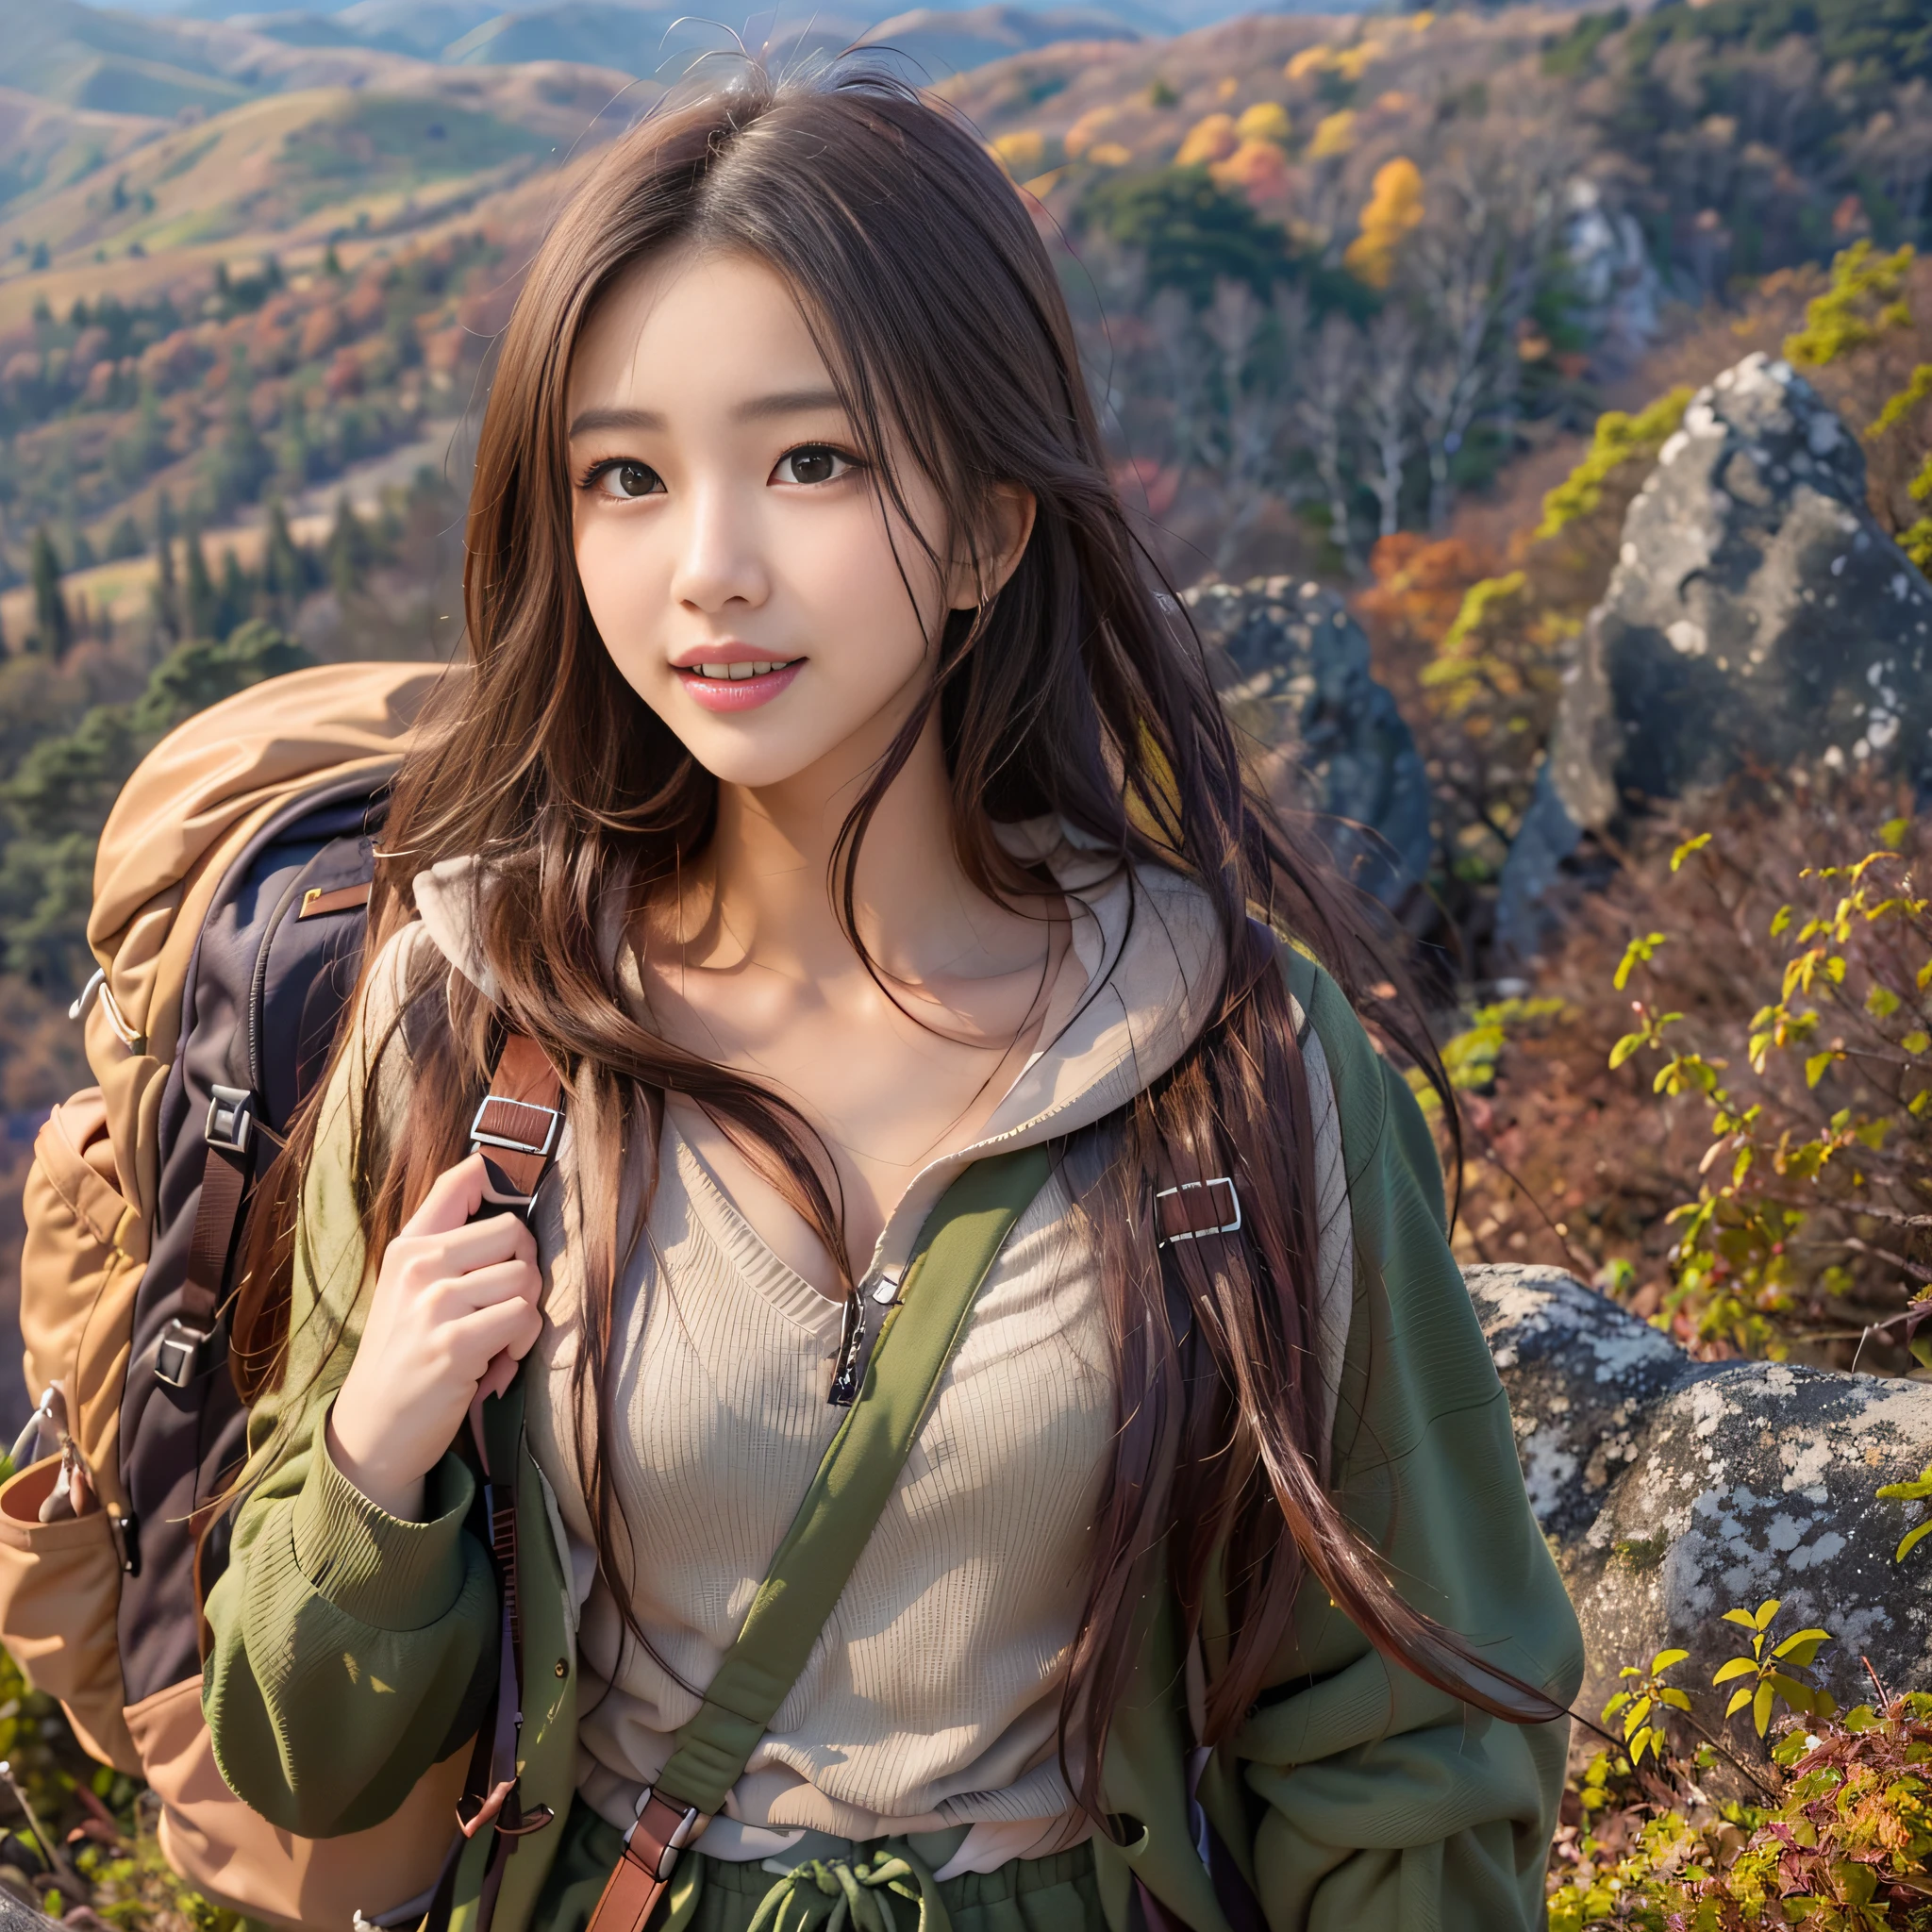 (Nature-scape photography), (best quality), masterpiece:1.2, ultra high res, photorealistic:1.4, RAW photo, (Magnificent mountain, sea of clouds), (On a very high mountain peak), (Blue sky in autumn, Red-colored forest), (wide-angle shot),  (Show cleavage:0.8),
(1girl), (Photo from the knee up:1.3), (18 years old), (smile:1.2), (shiny skin), (real skin), (semi-long hair, dark brown hair)
(green Parker, white V-neck T-shirt, brown Trekking pants), (Carrying a large backpack), 
(ultra detailed face), (ultra Beautiful fece), (ultra detailed eyes), (ultra detailed nose), (ultra detailed mouth), (ultra detailed arms), (ultra detailed body), pan focus, looking at the audience